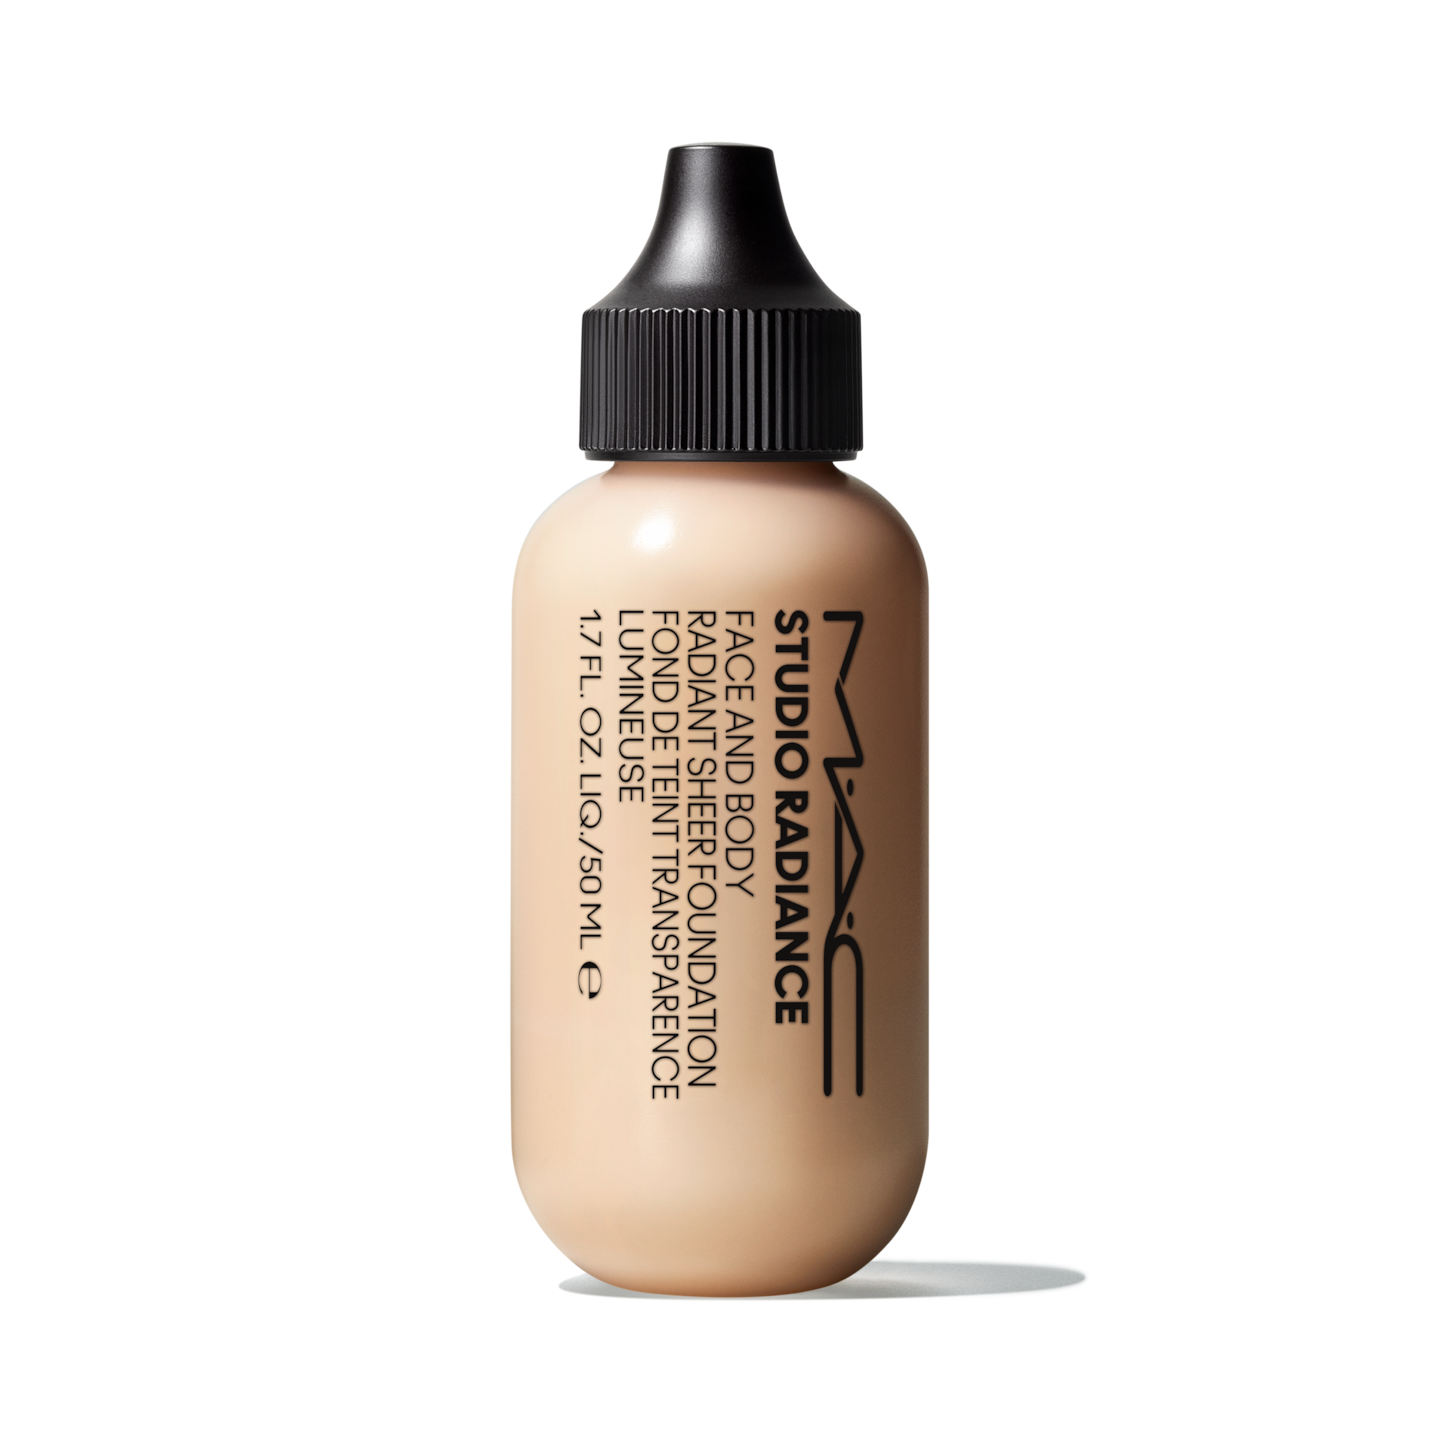 M·A·C Studio Face and Body Foundation 120 ml